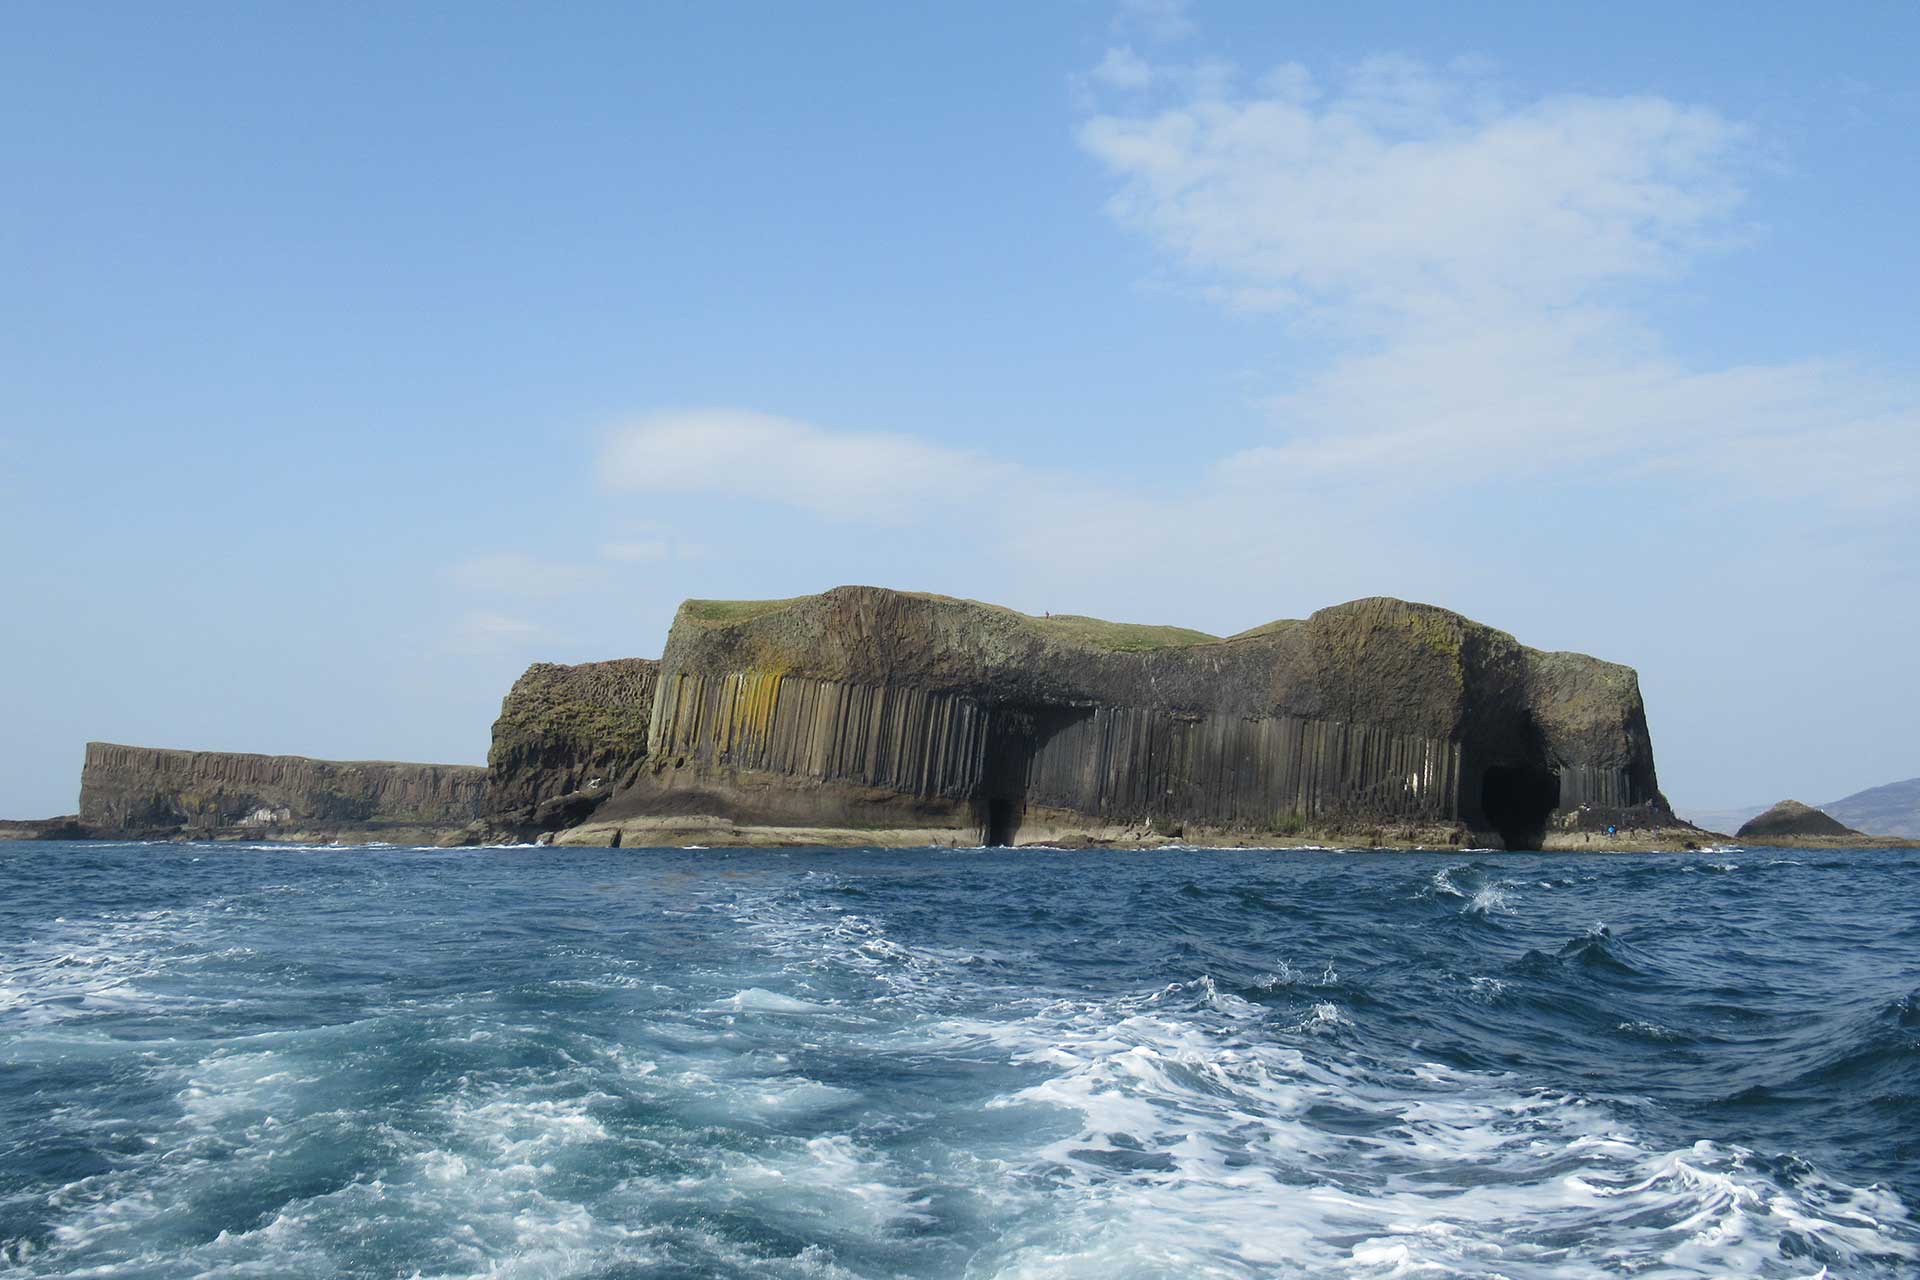 Explore the Hebridean Islands, like Staffa when you stay with us at Birchbrae Highland Lodges, nr Glencoe & Fort William